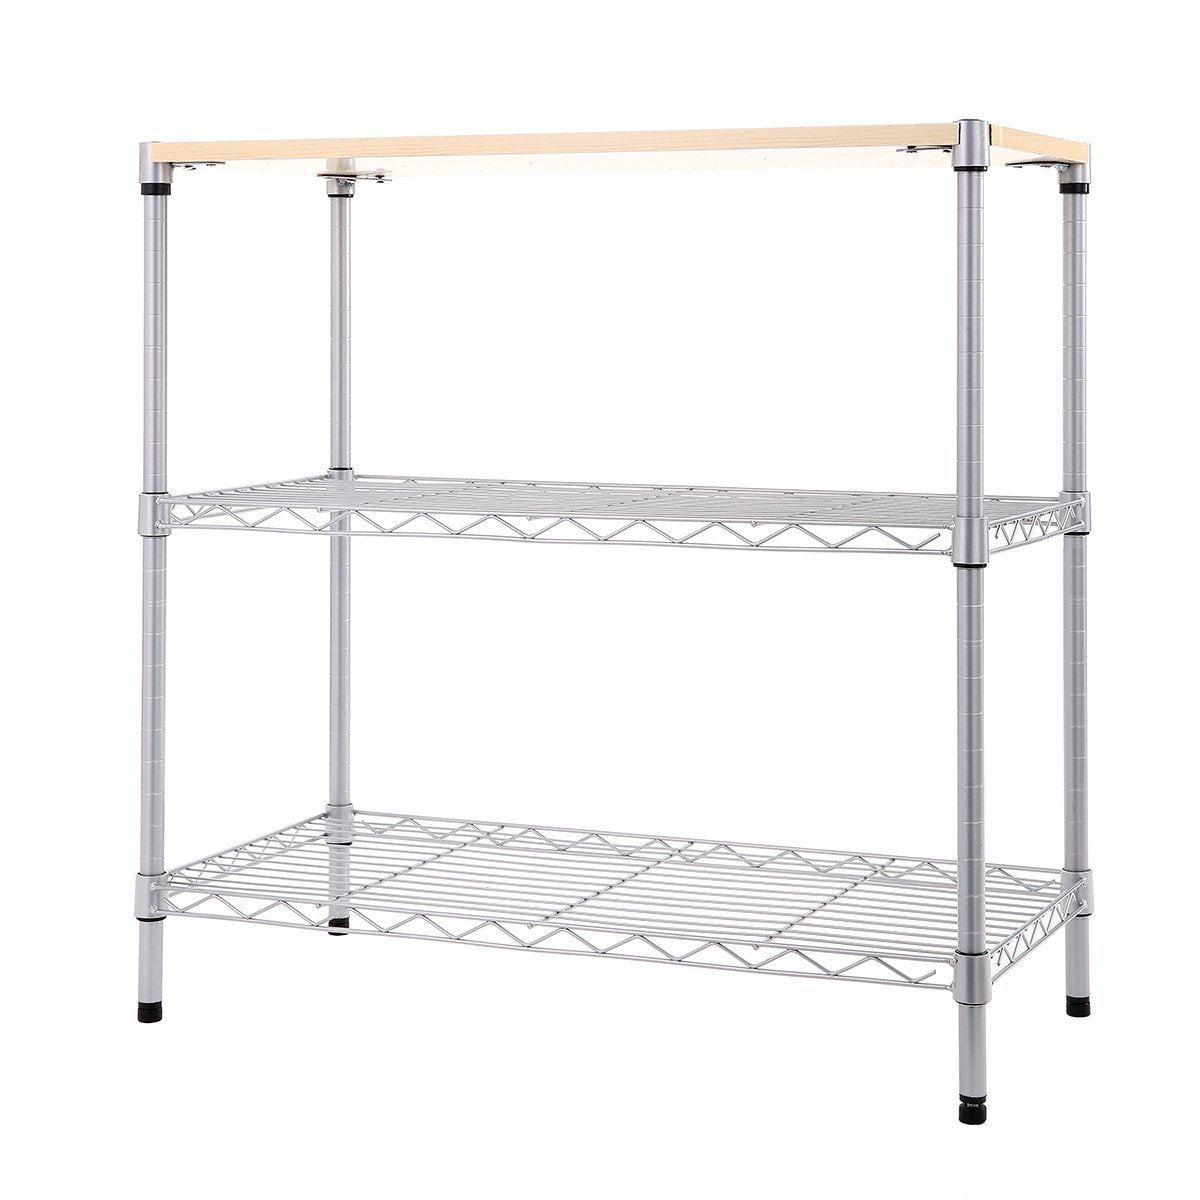 Hive 3 Tier Wire Shelving Home, Metro Shelving Wood Top